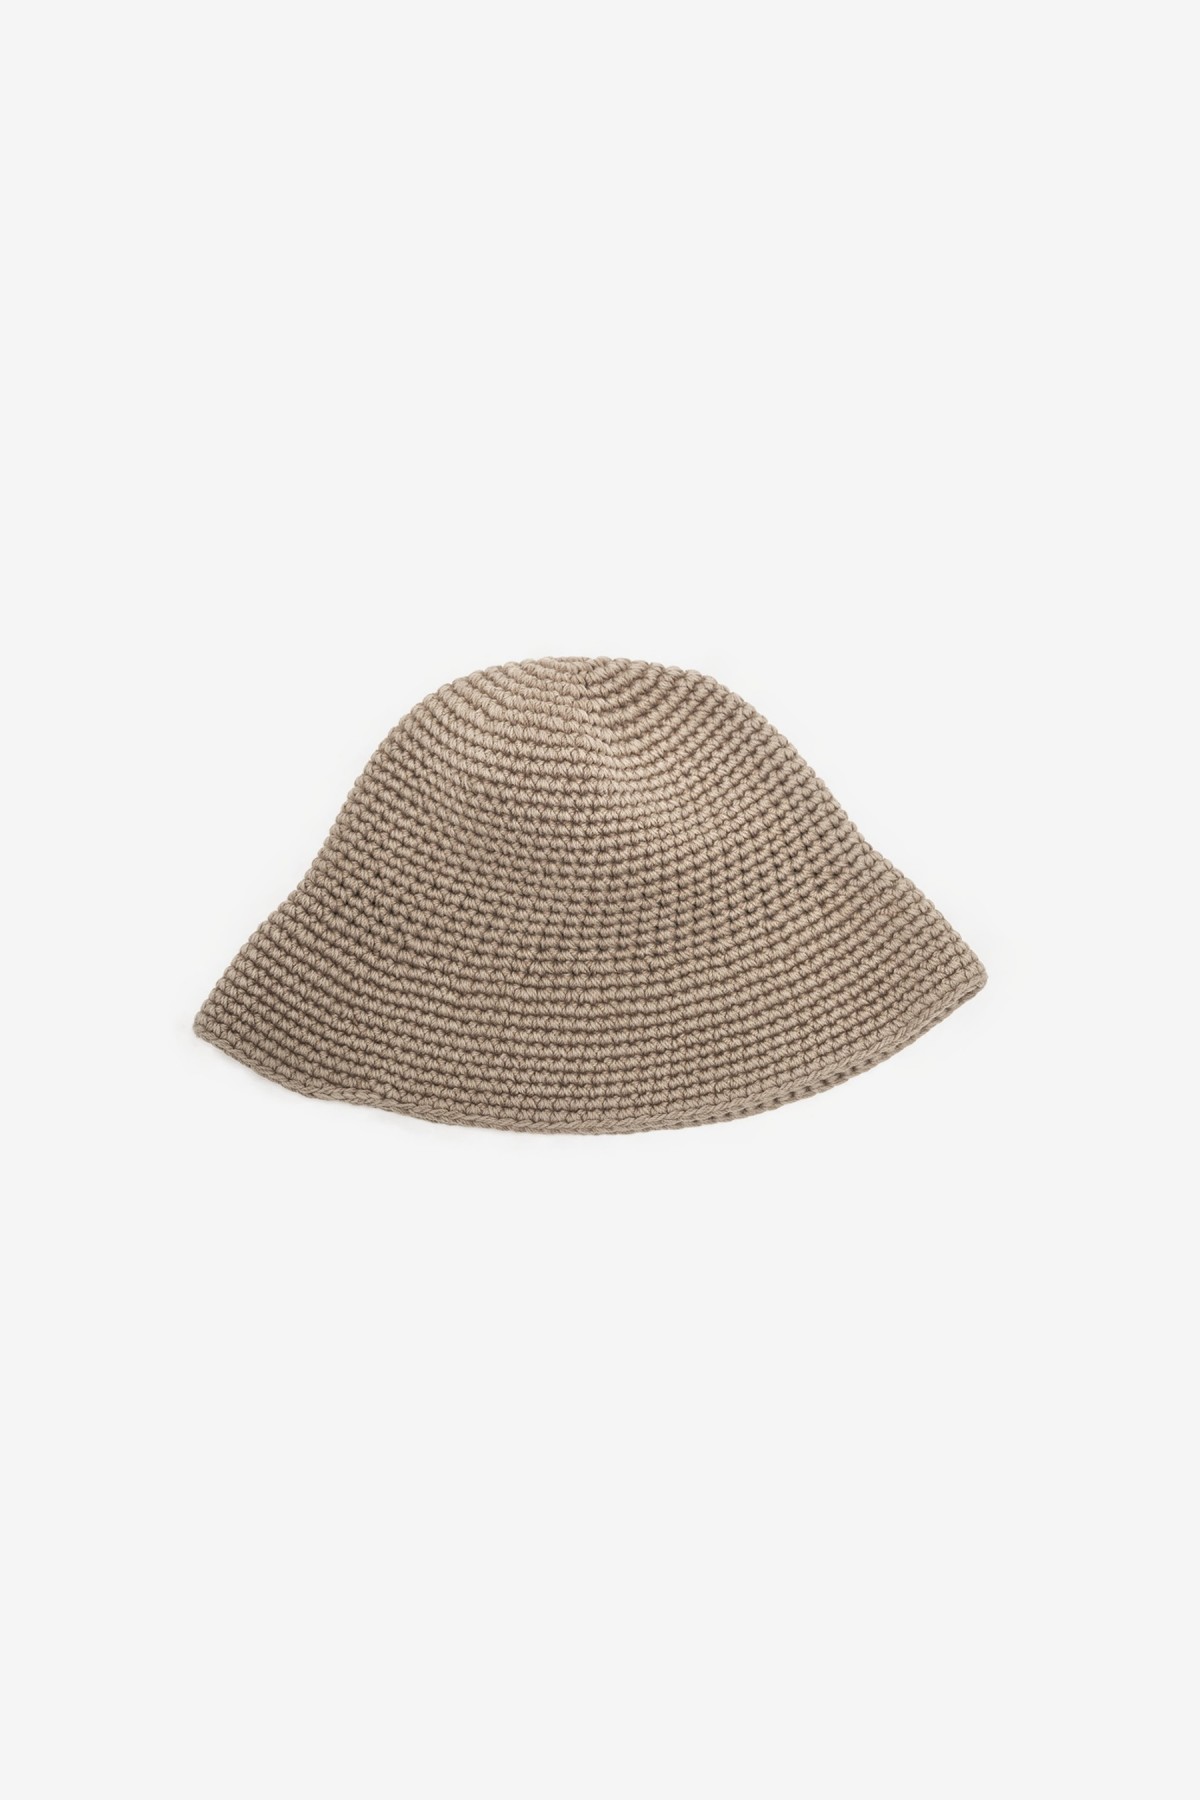 Our Legacy Tom Tom Hat in Uniform Olive Tousled Cotton